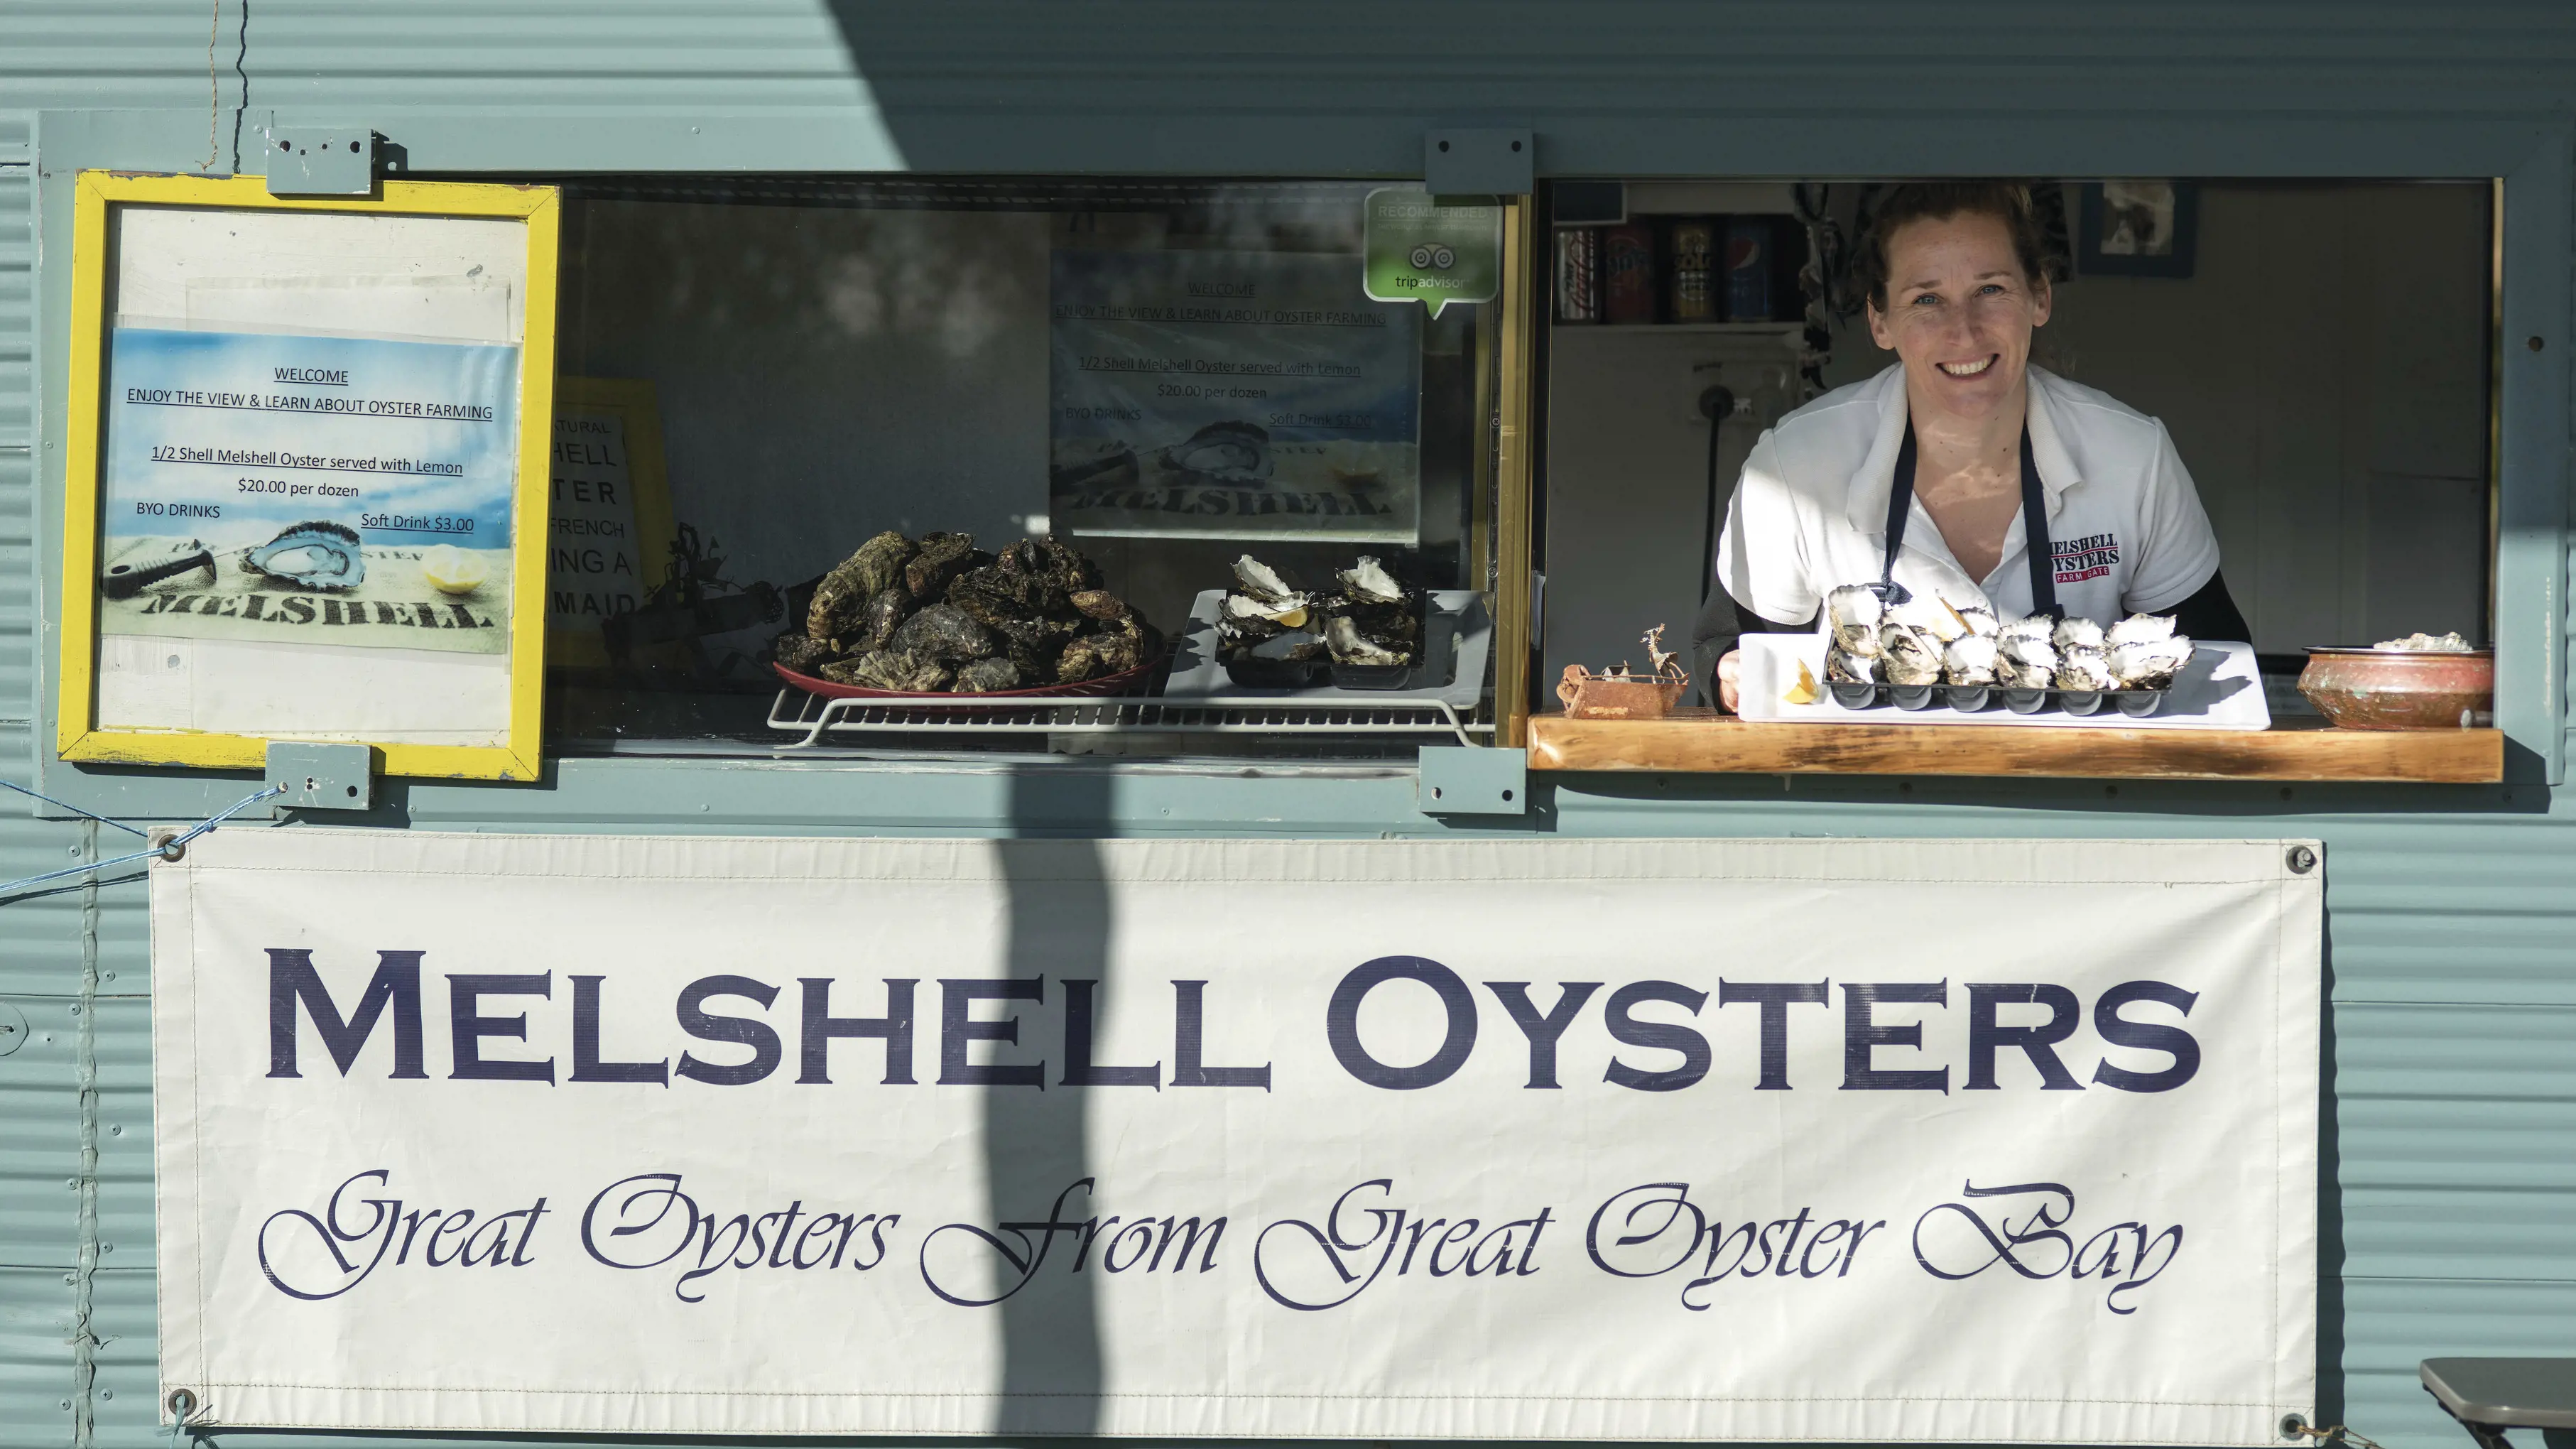 Image of Cassy Melrose in her shack, Melshell Oysters Farm Gate, holding a platter of oysters.